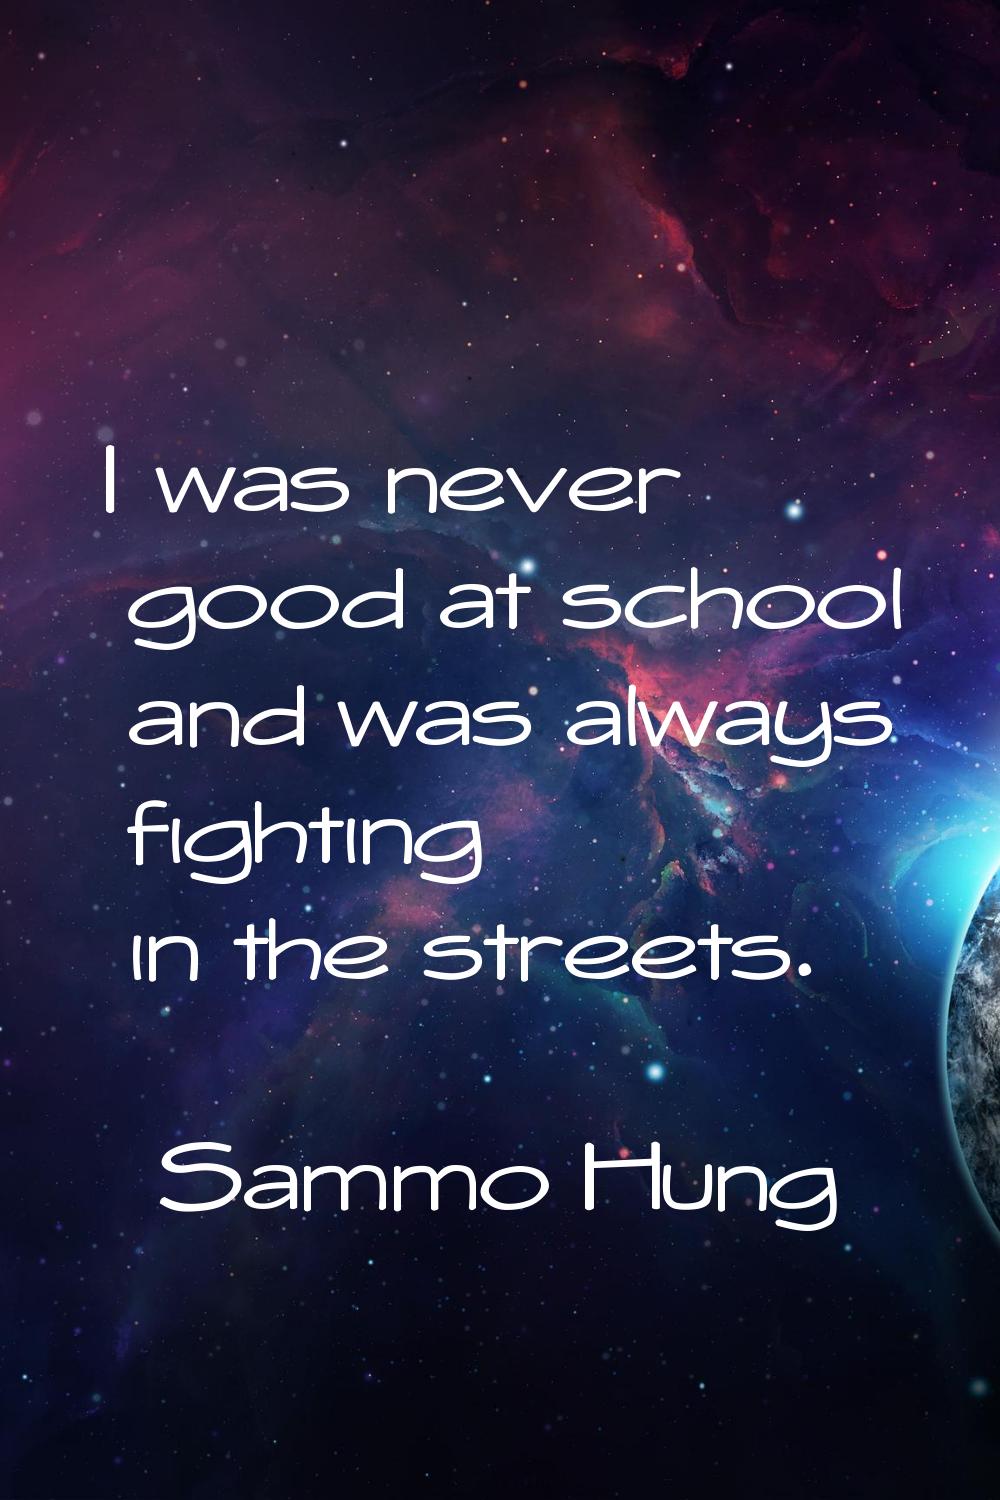 I was never good at school and was always fighting in the streets.